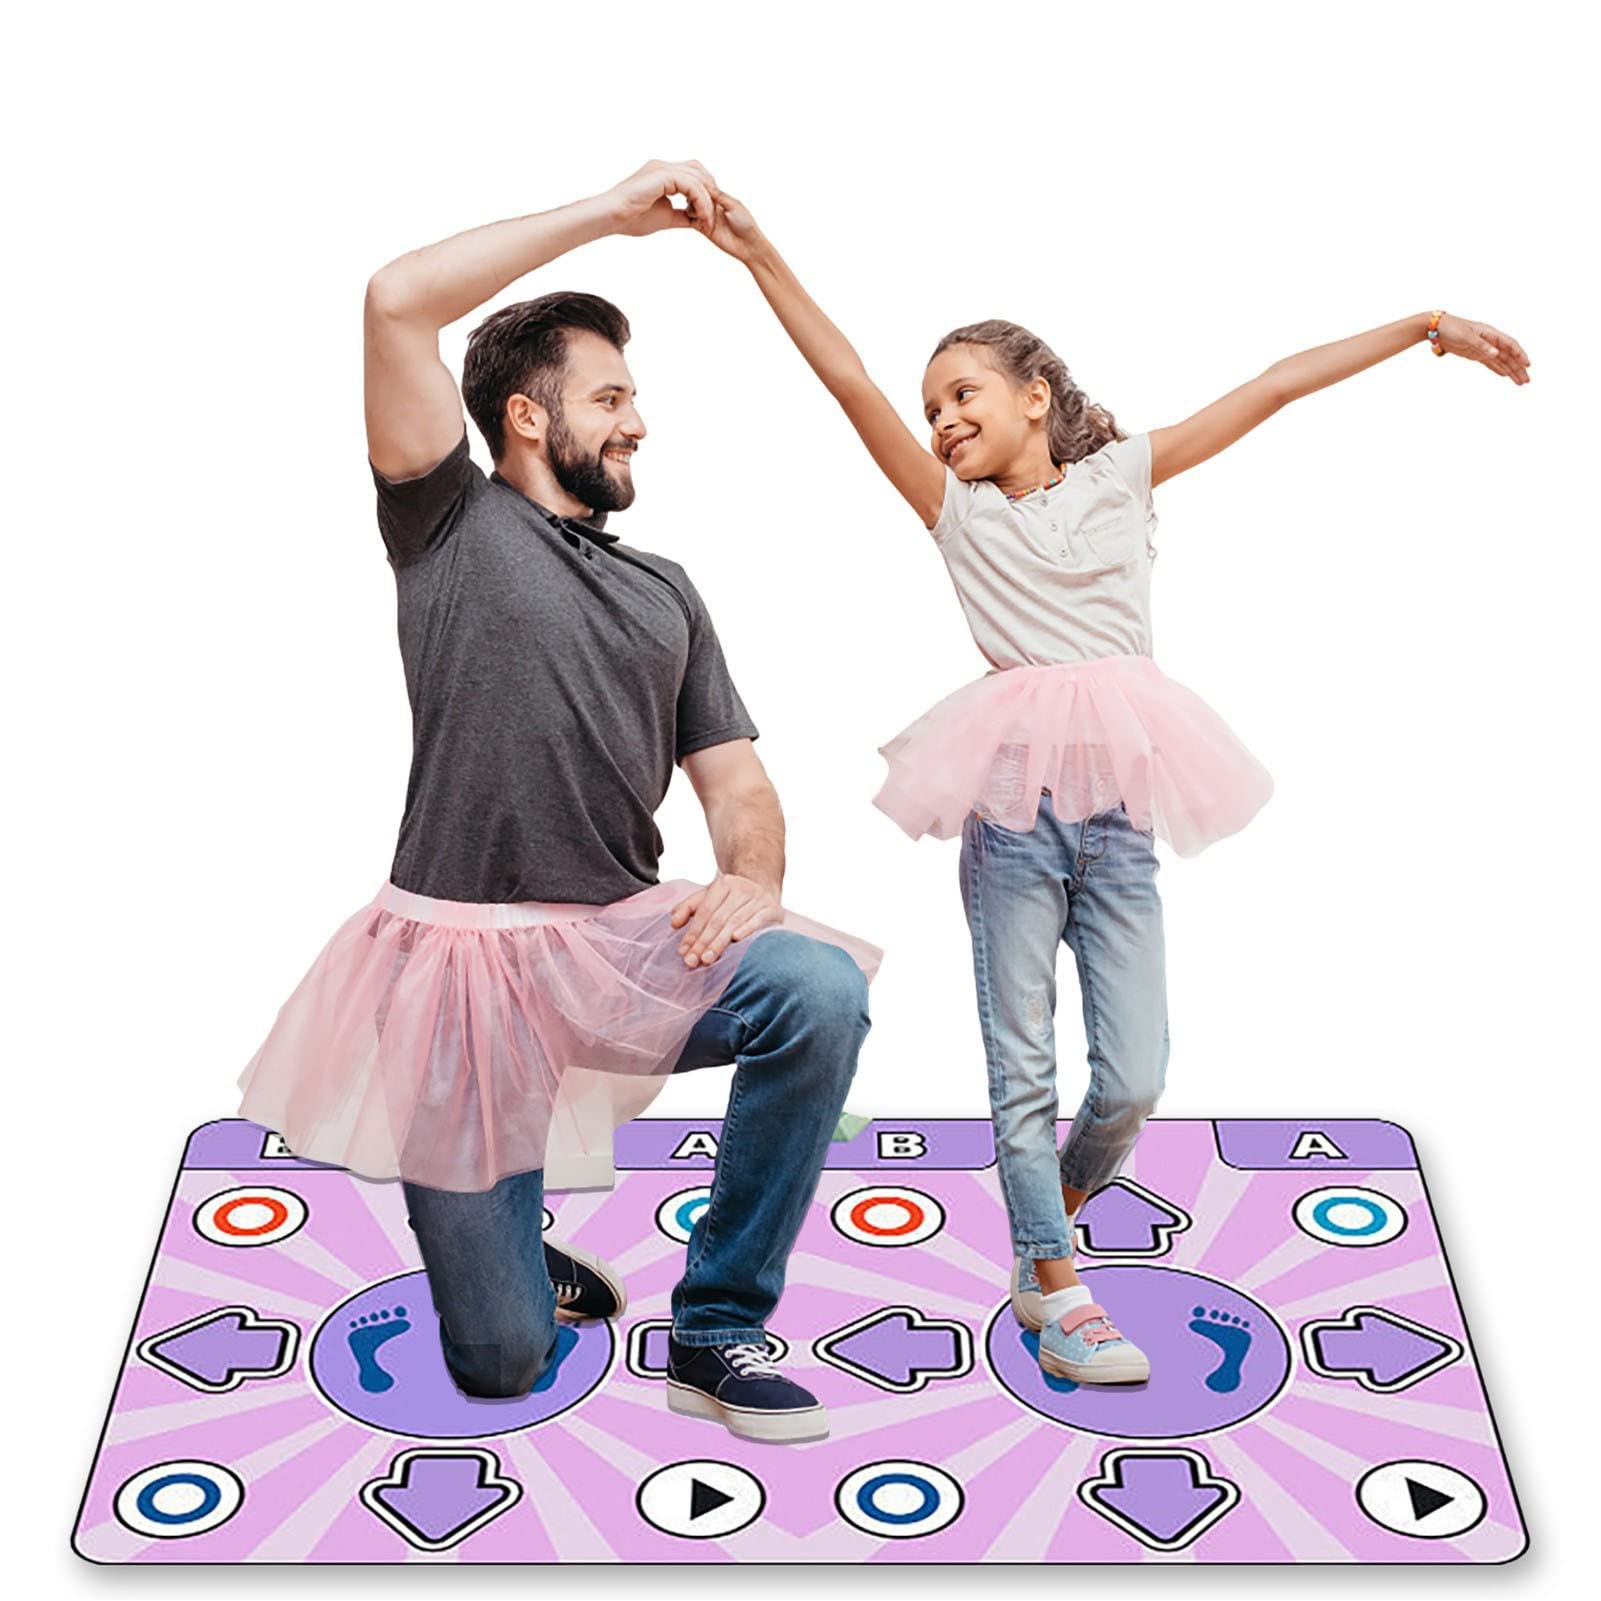 Double User Dance Mat, Musical Electronic Dance Mats, Non Slip Dance Step Pad Dance Floor Mat Yoga Game Blanket with Wireless Handle for Kids and Adults, Boys & Girls